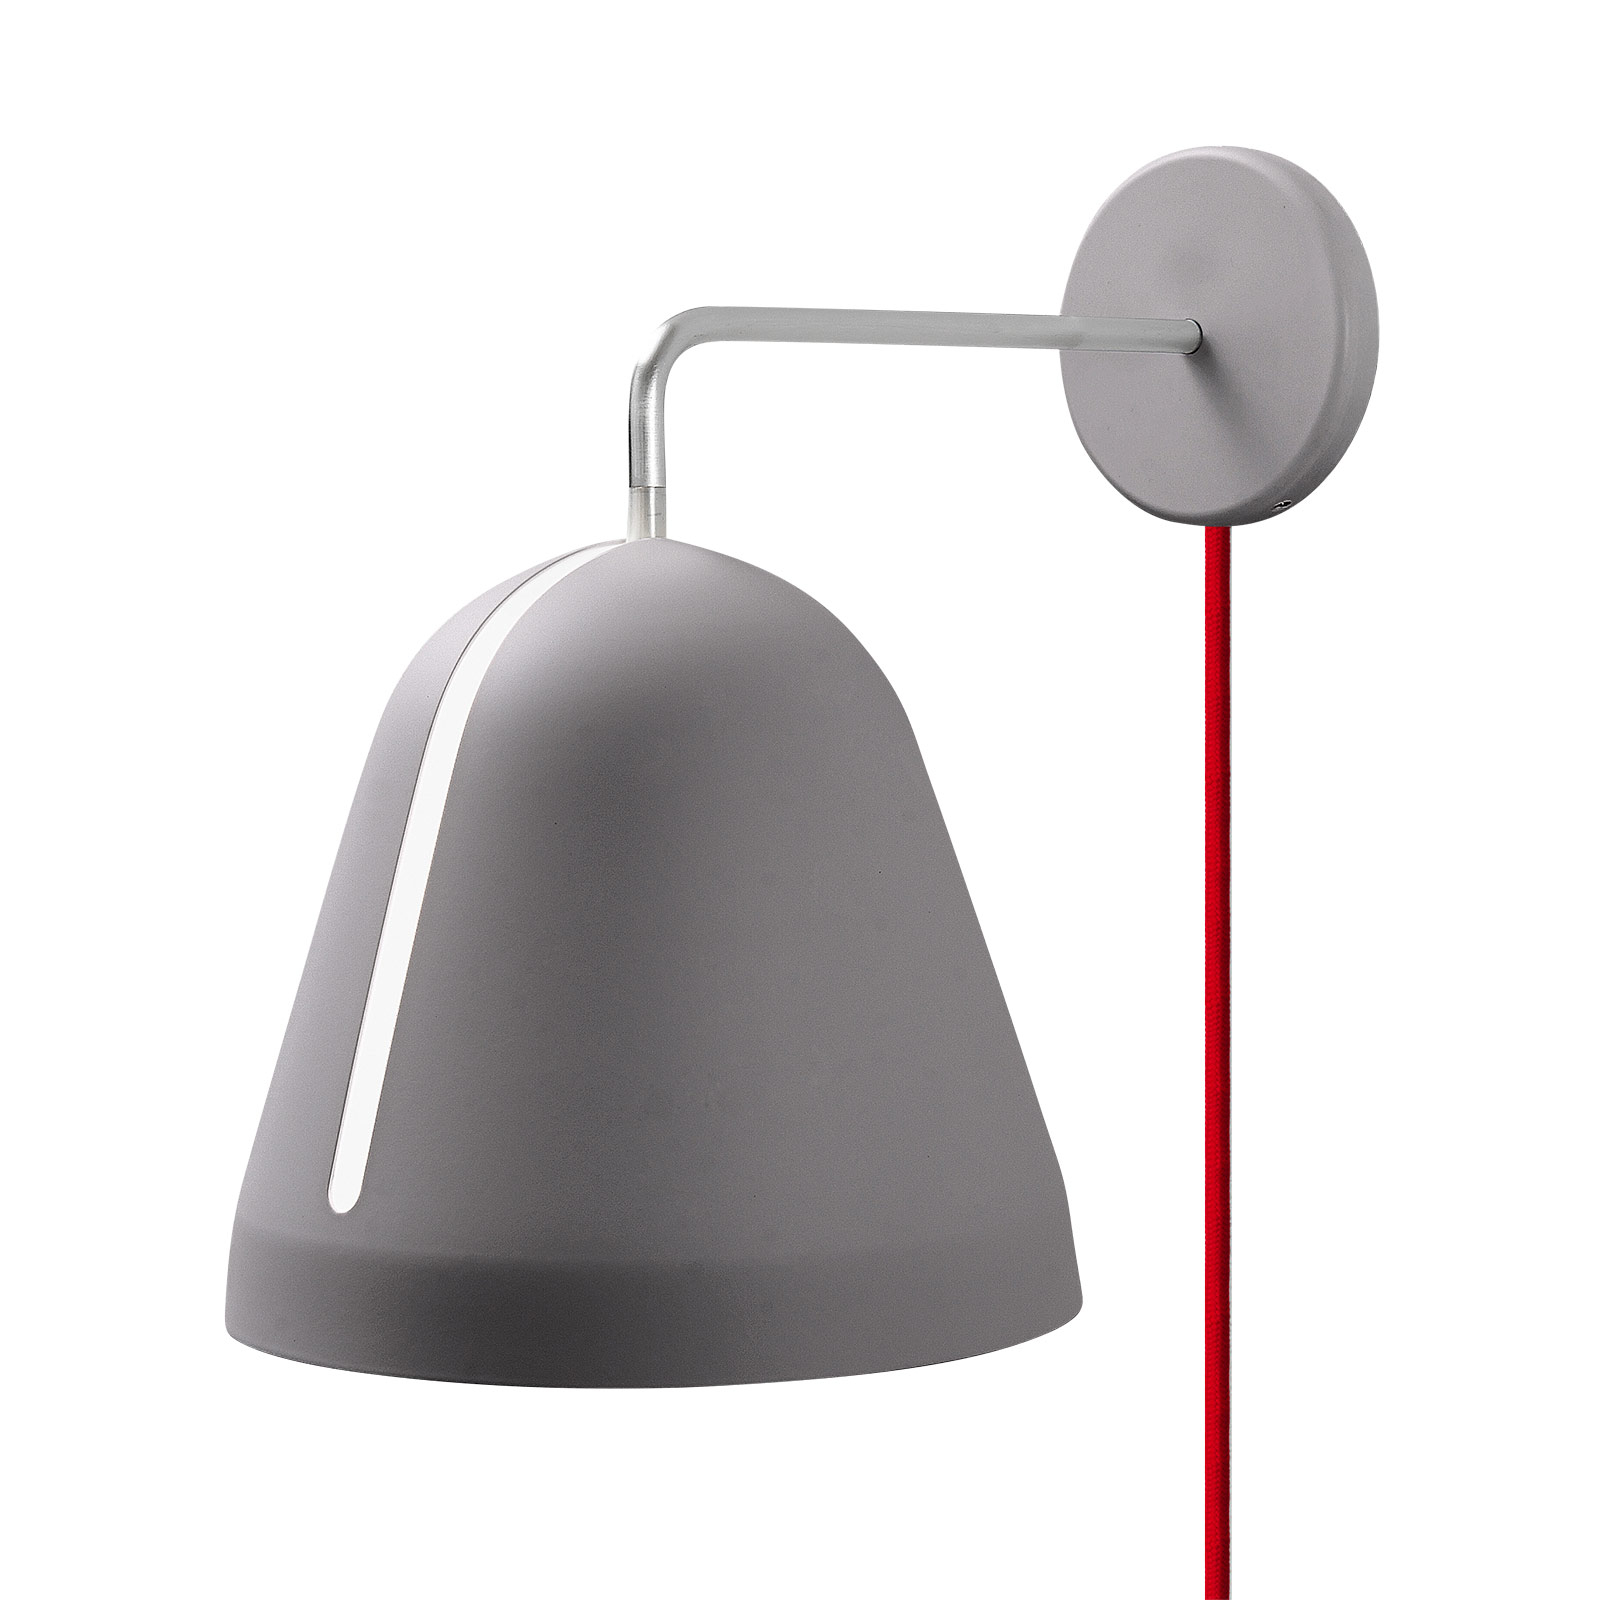 Nyta Tilt Wall wall light with a red cable, grey